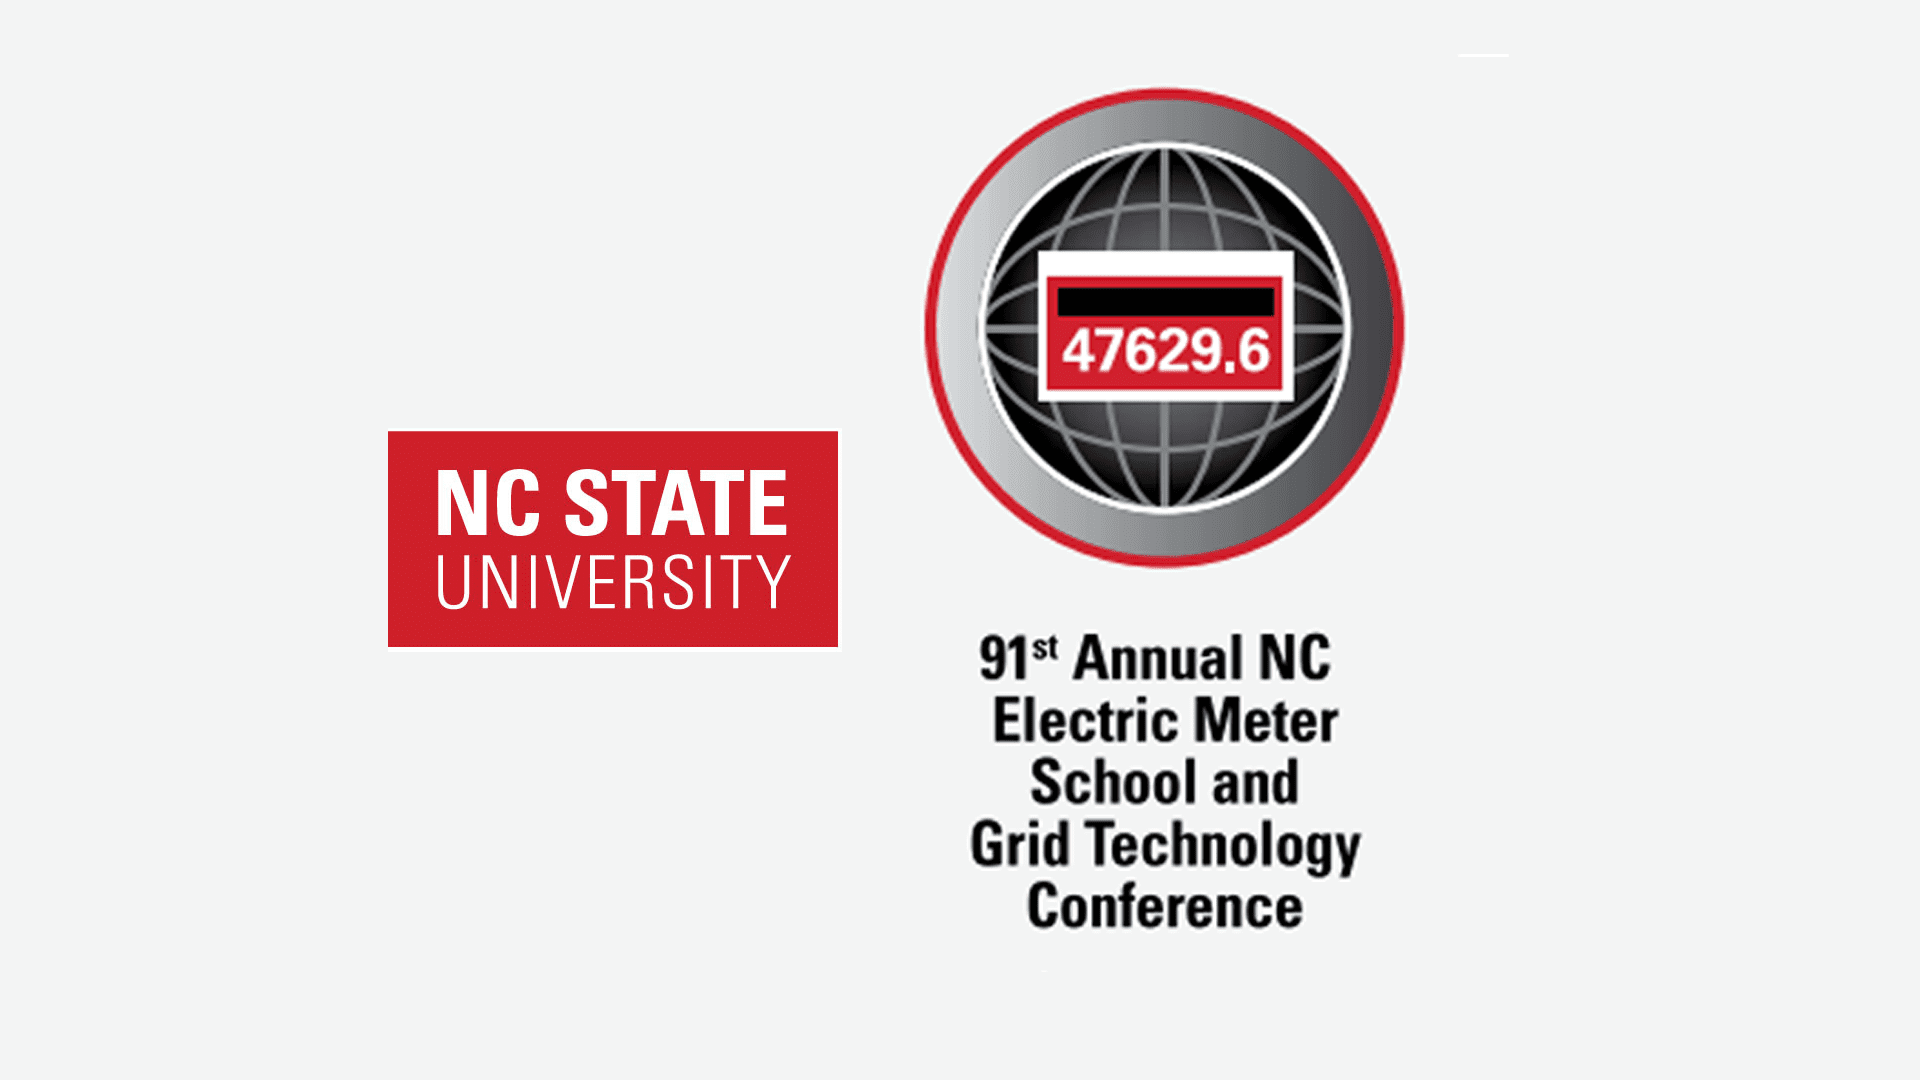 North Carolina Electric Meter School and Conference